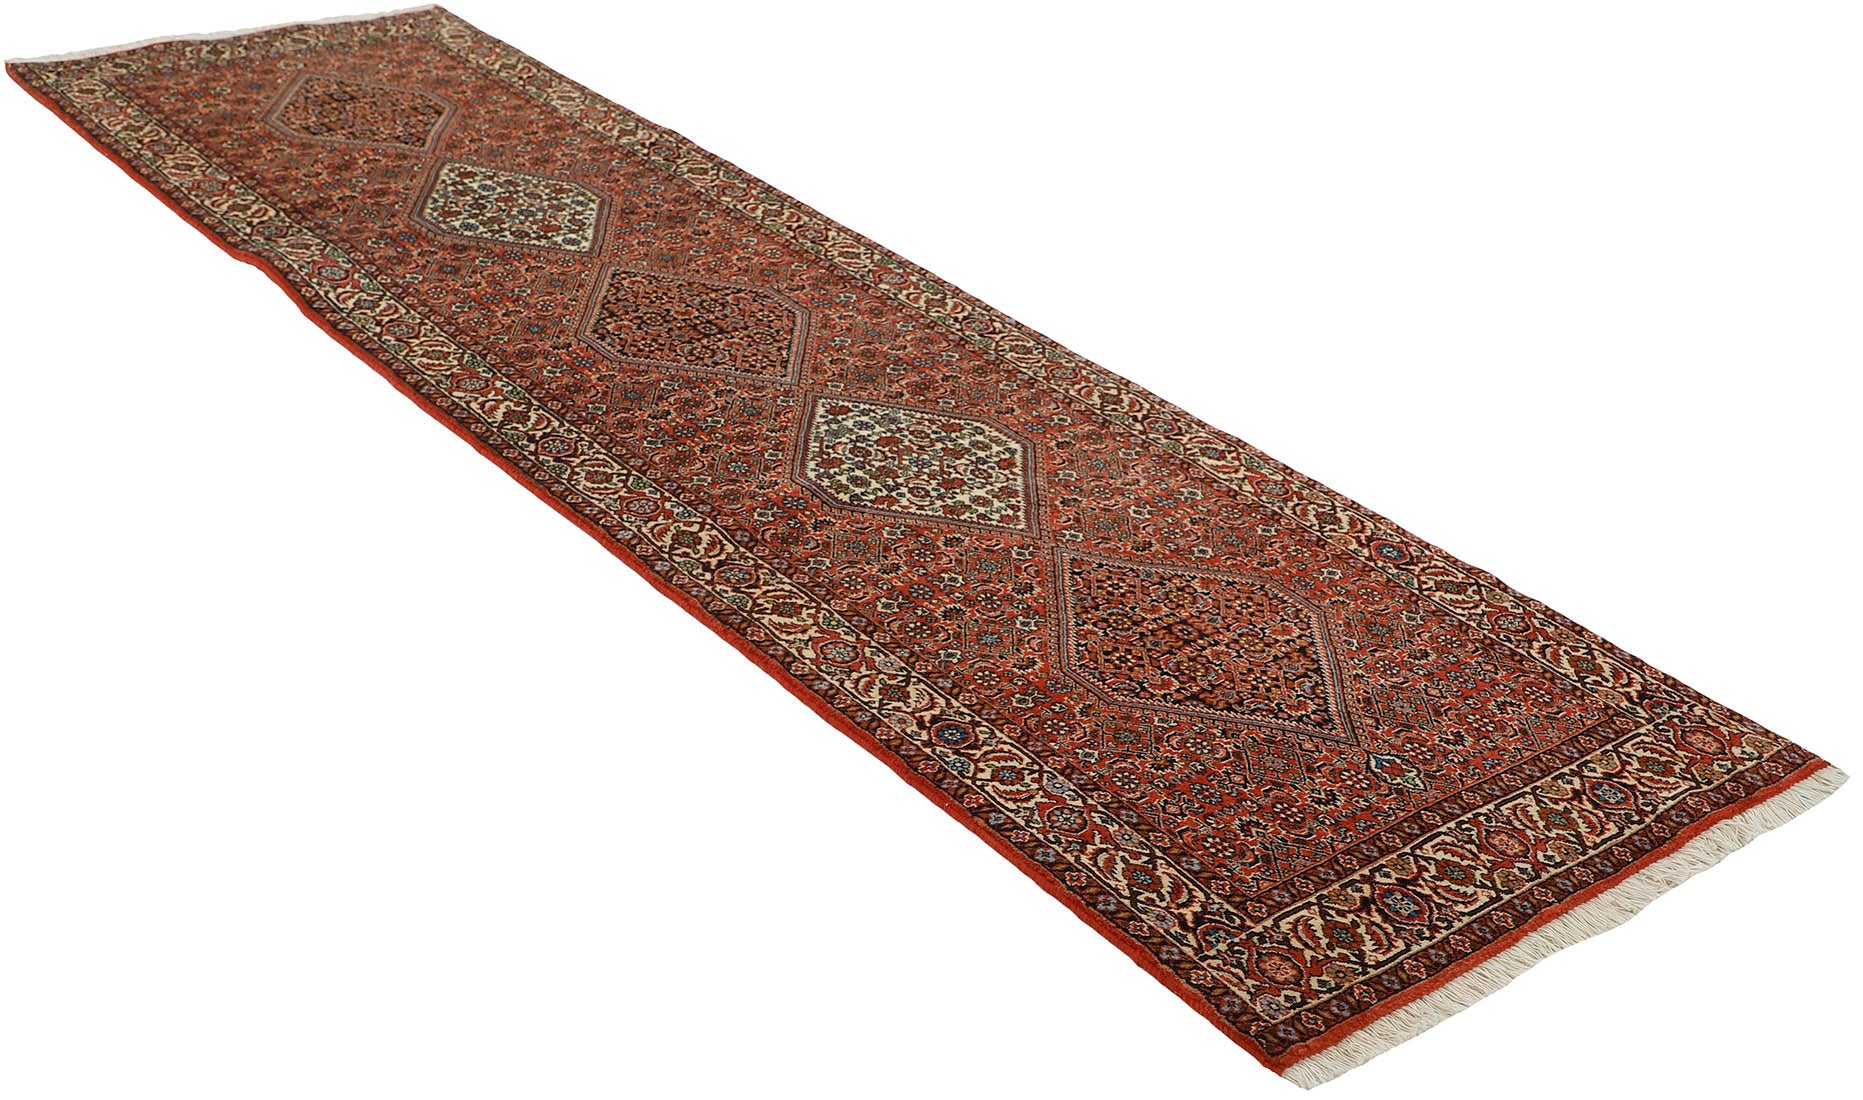 Red and cream persian runner with traditional floral design
